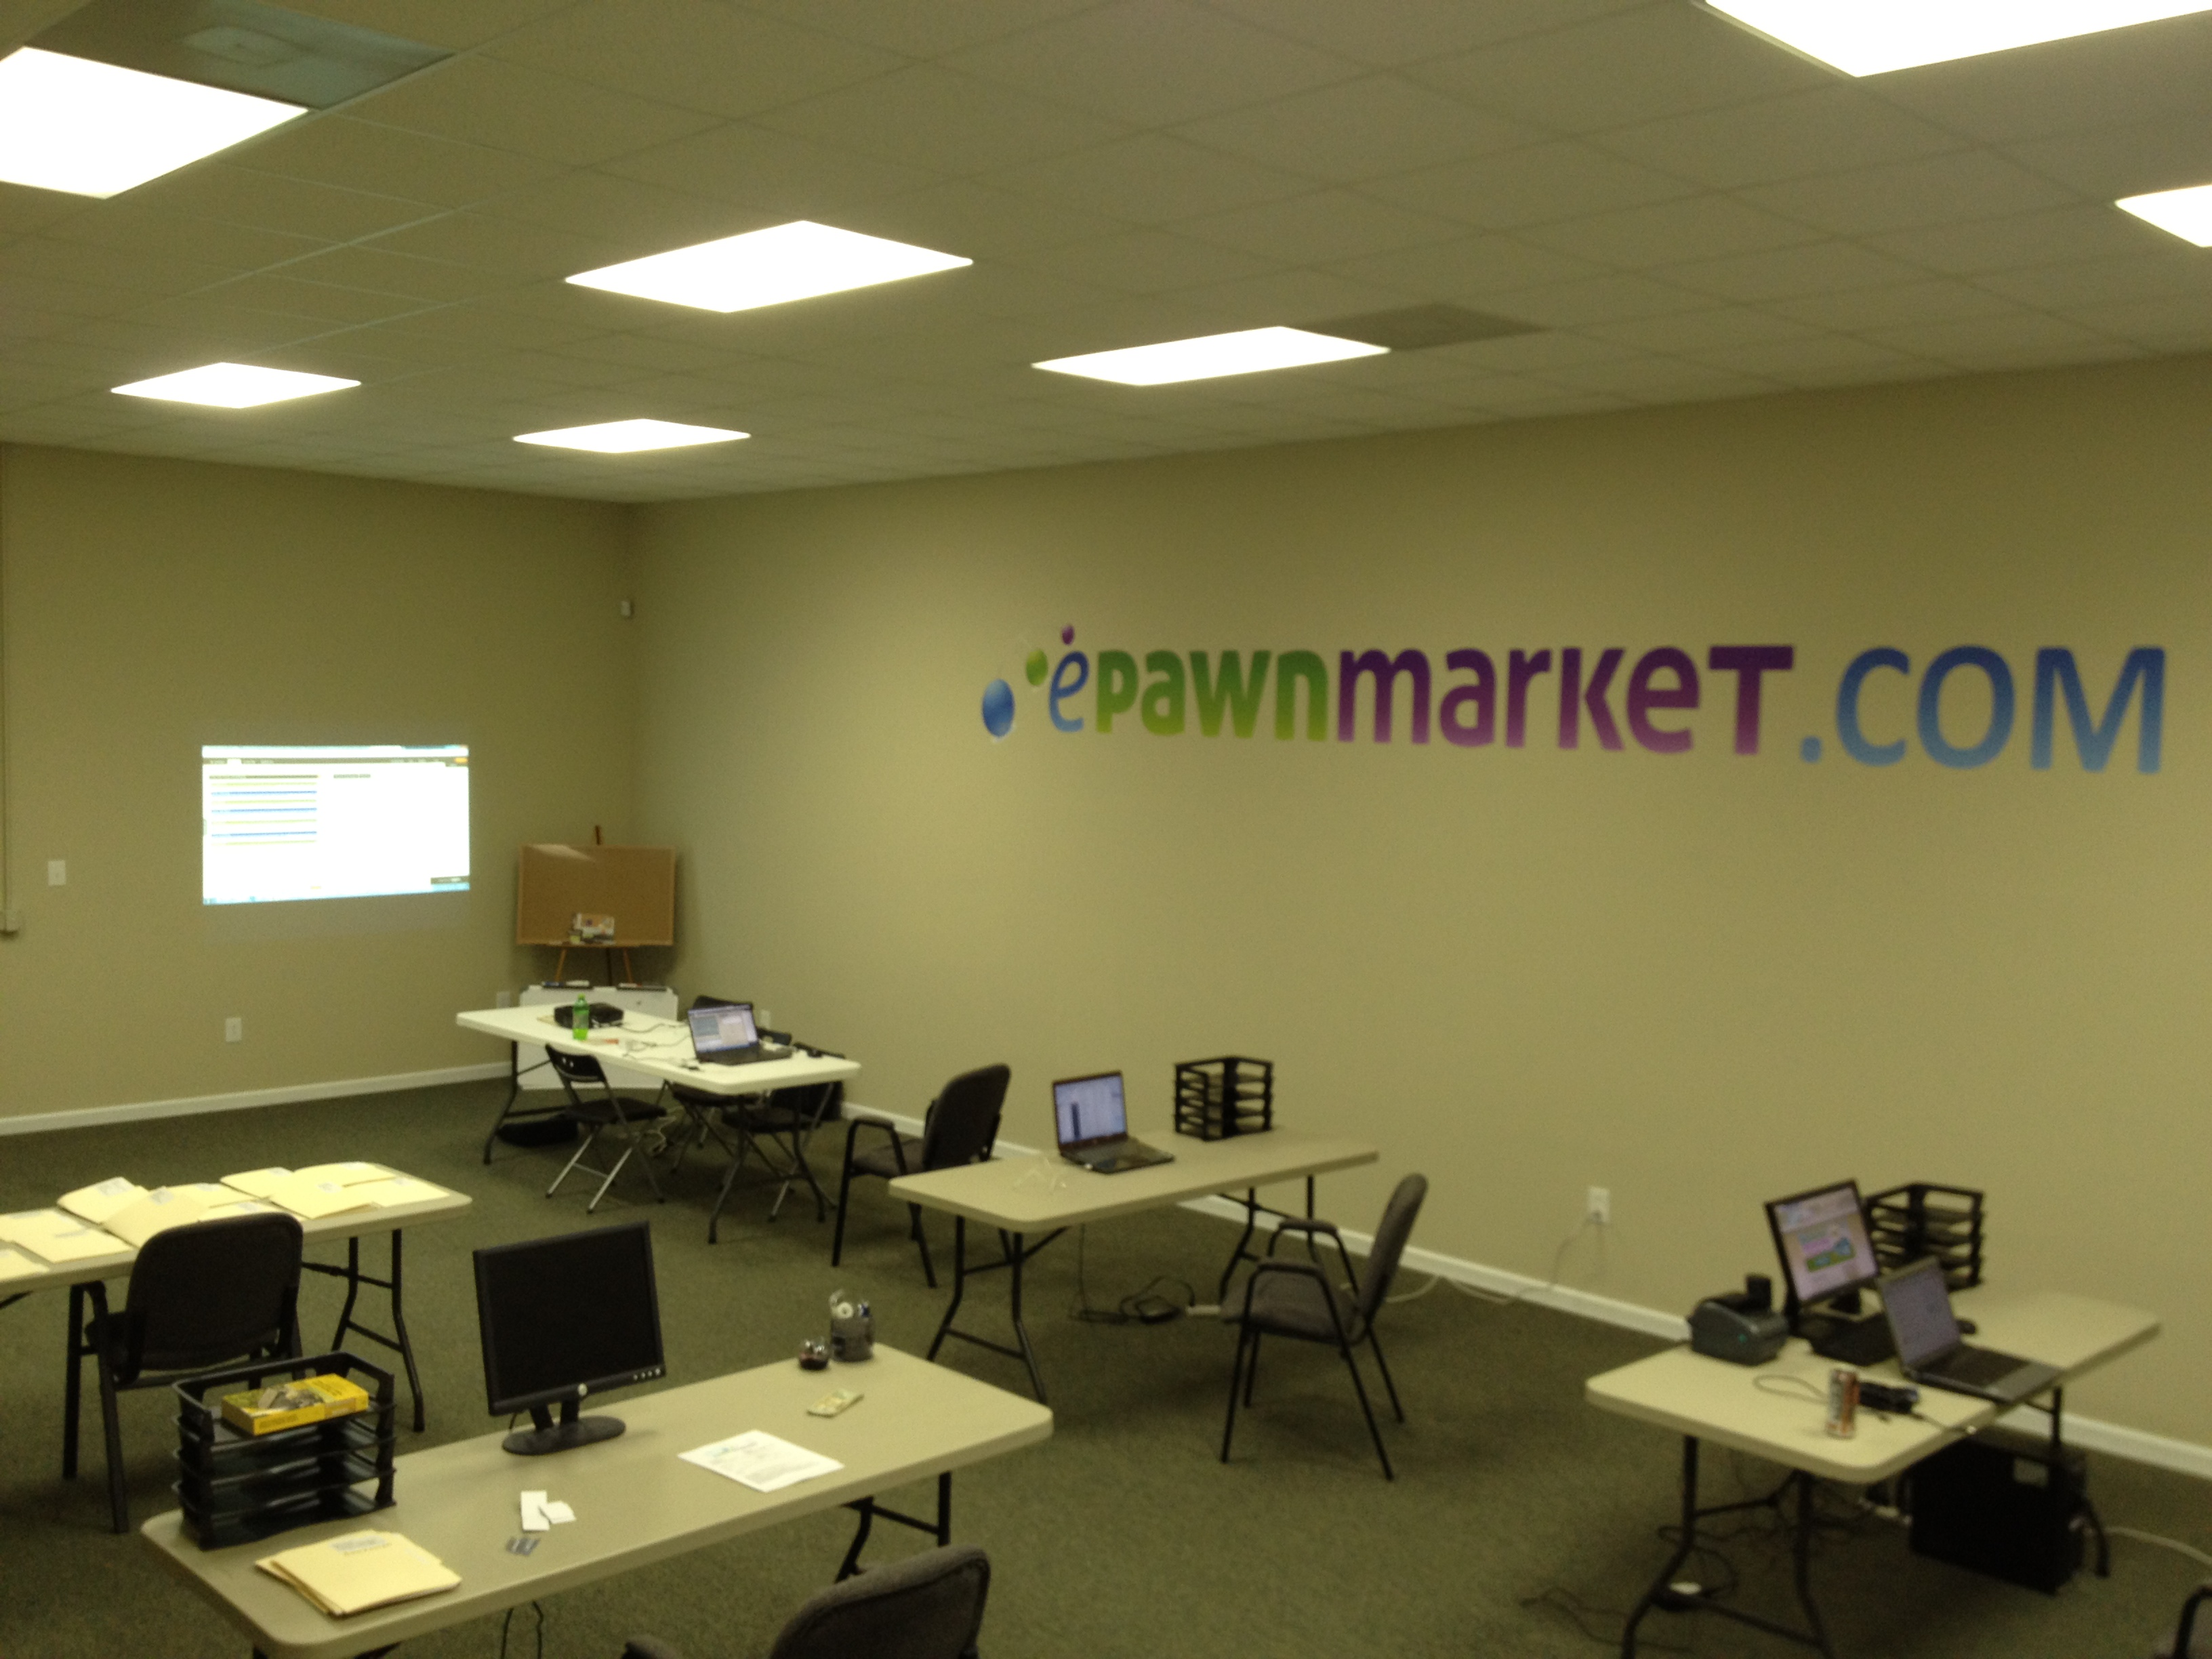 Online Pawn Shop ePawnMarket's Renovated Processing And Fullfillment Center